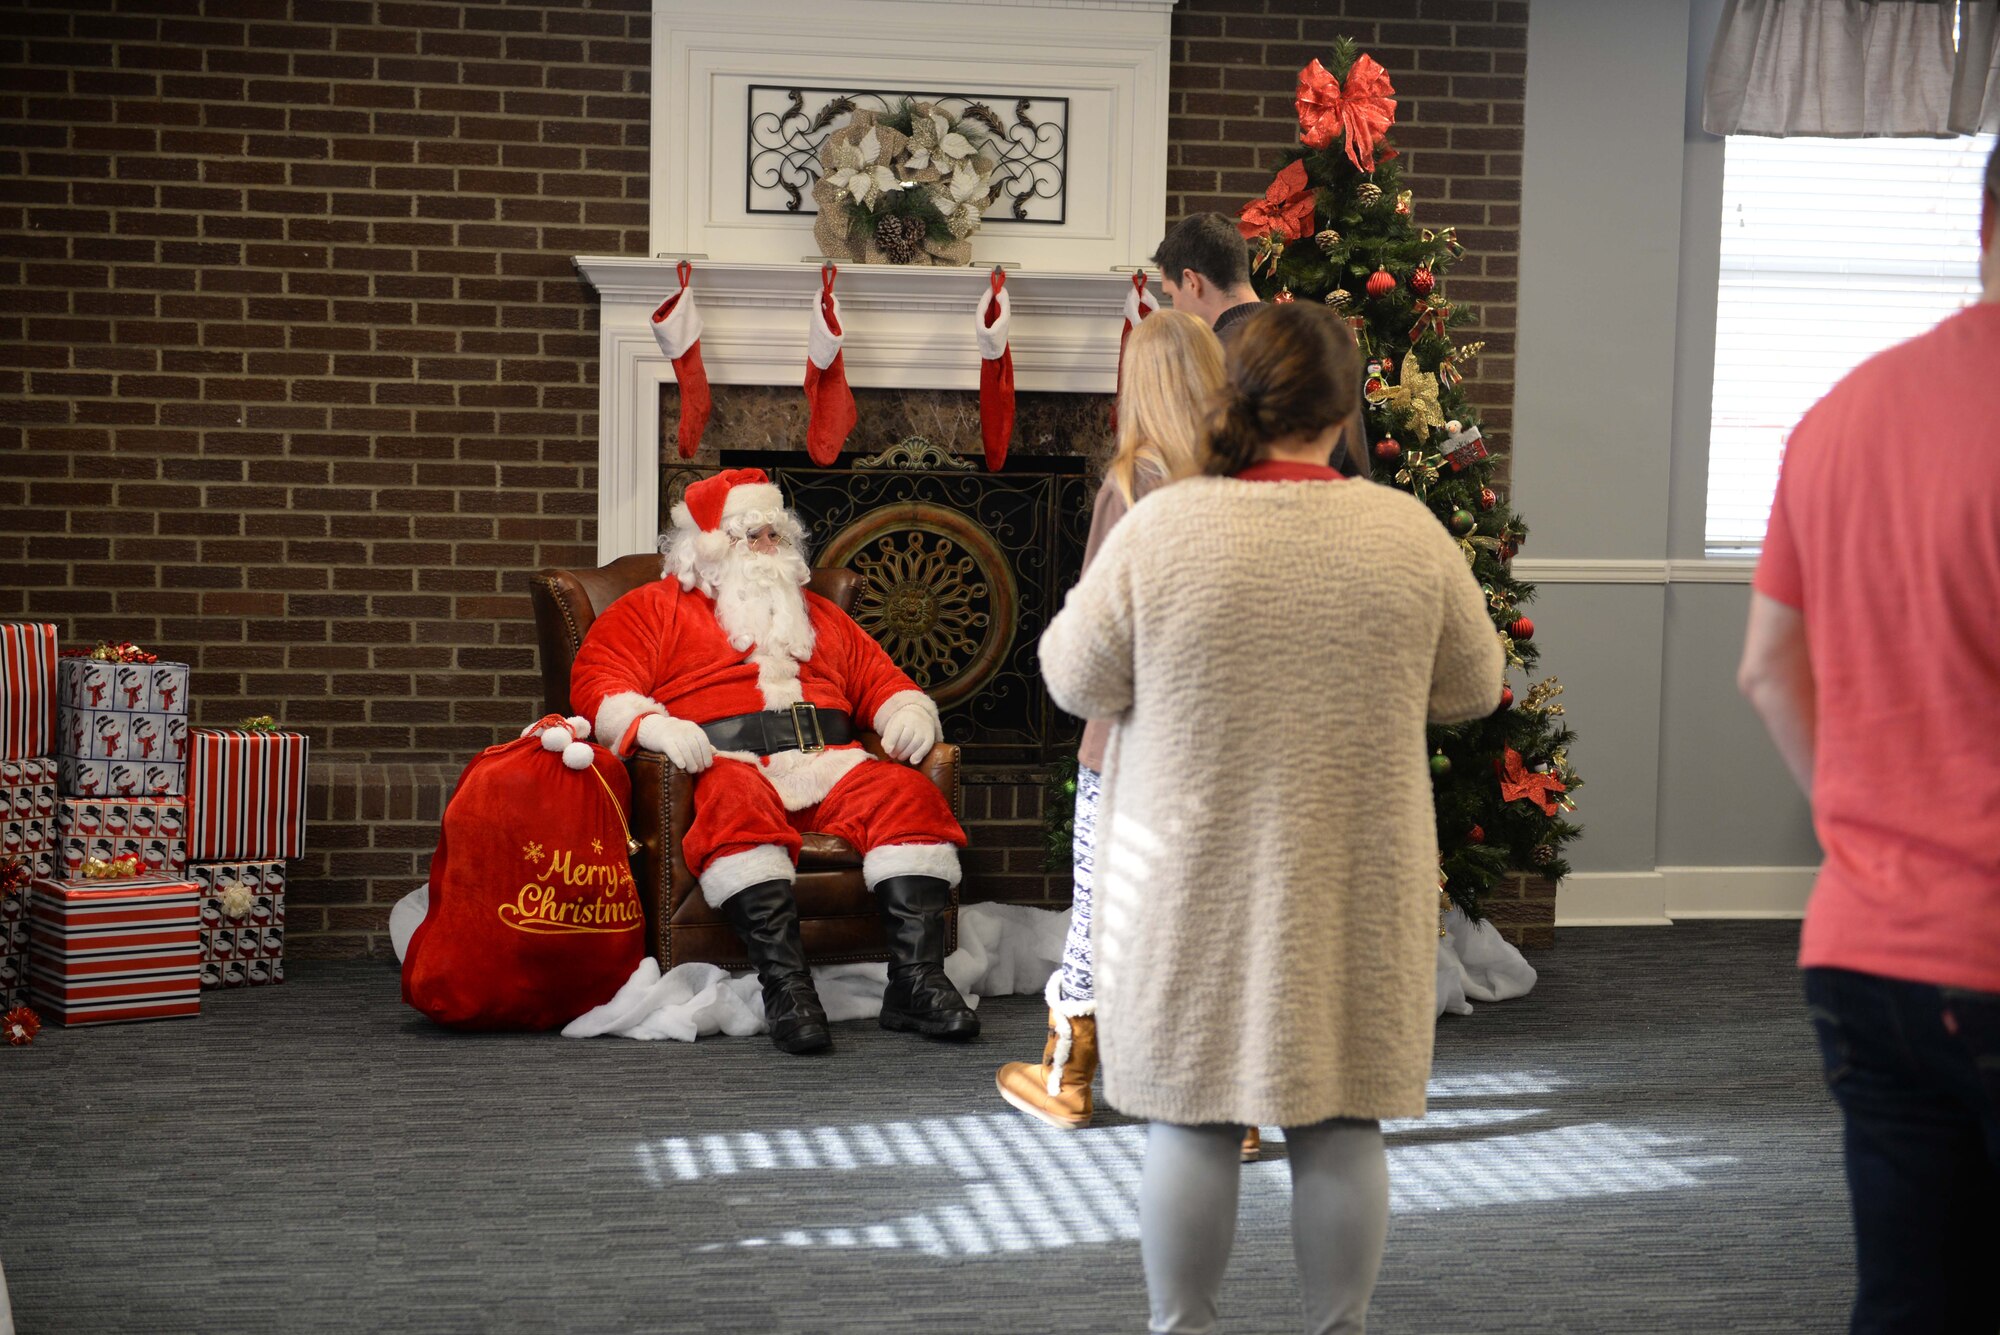 Families and children wait in line to get photos with Santa Claus during Breakfast with Santa in the Columbus Club Dec. 14, 2019, on Columbus Air Force Base, Miss. According to legend, Santa lives in the North Pole with Mrs. Claus, the elves and their reindeer. (U.S. Air Force photo by Airman 1st Class Hannah Bean)